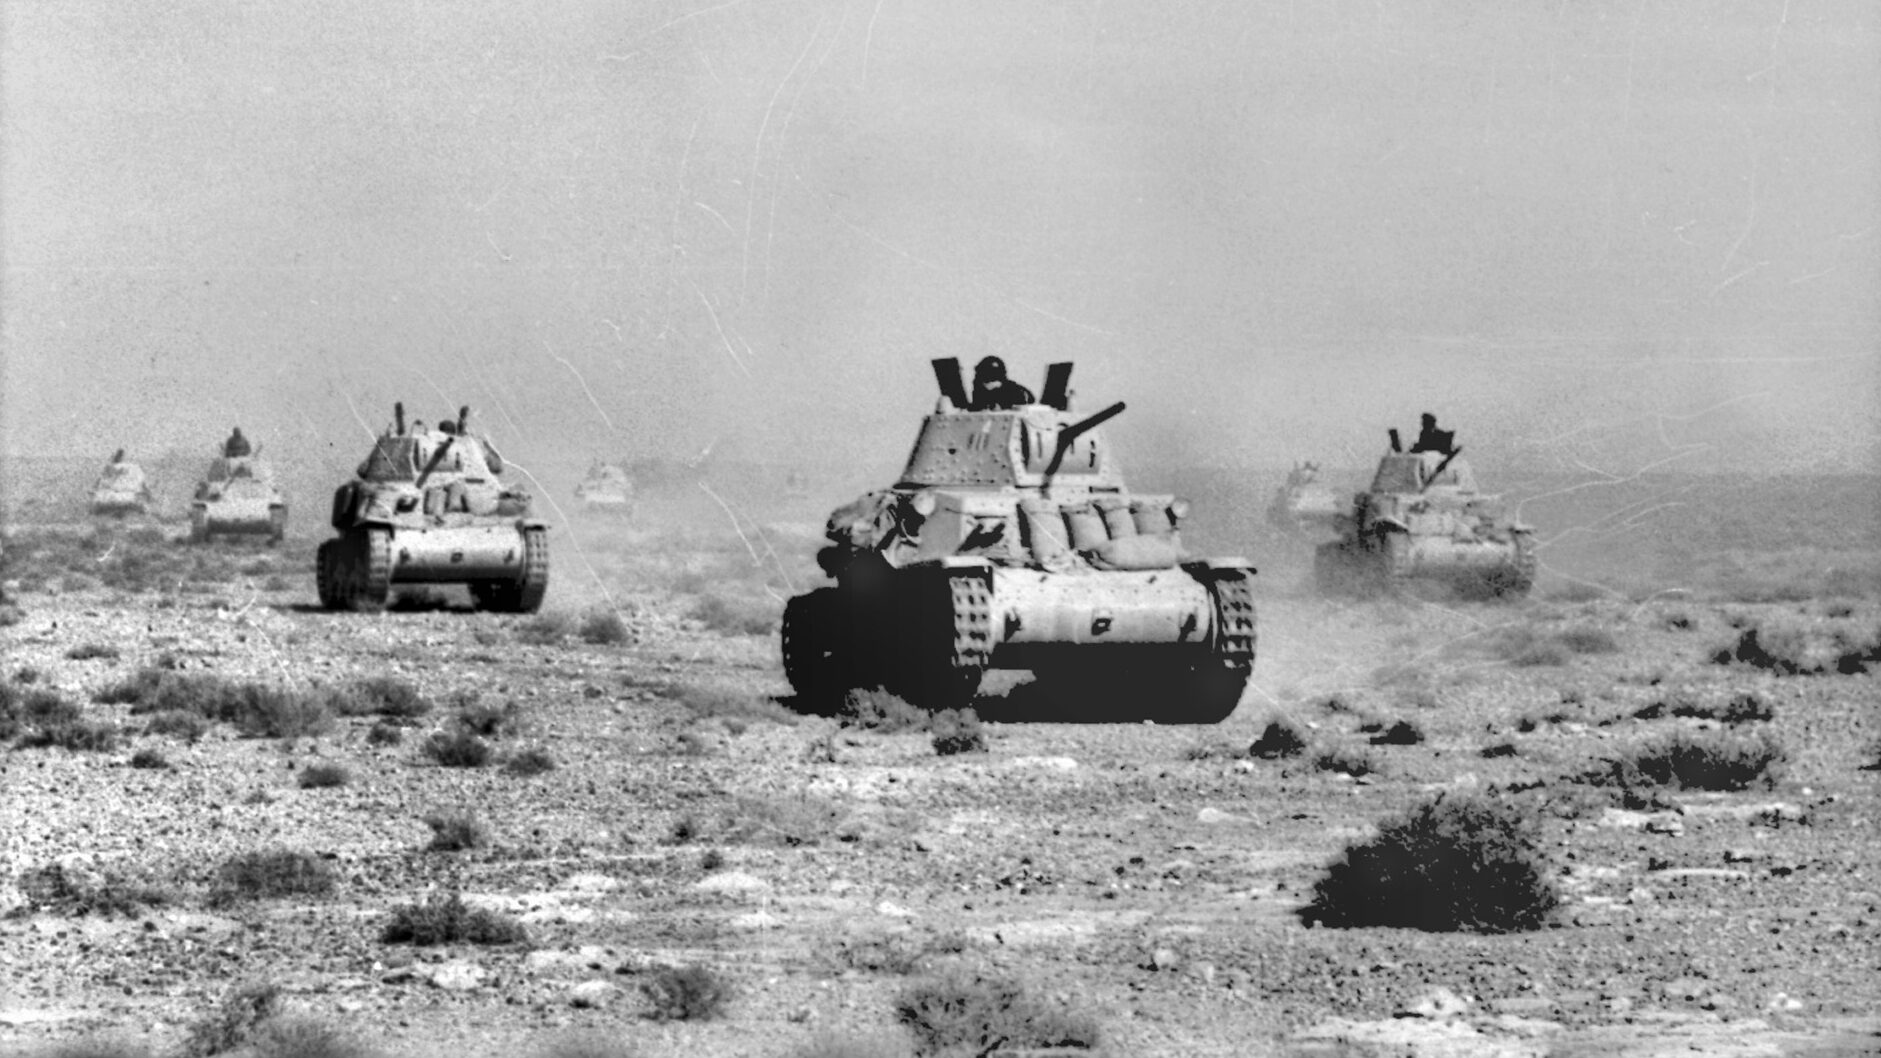 Italian tanks race across the North African desert. The British foiled the Italian invasion of Egypt in September 1940 and by February 1941 had driven the Italians from Libya. 